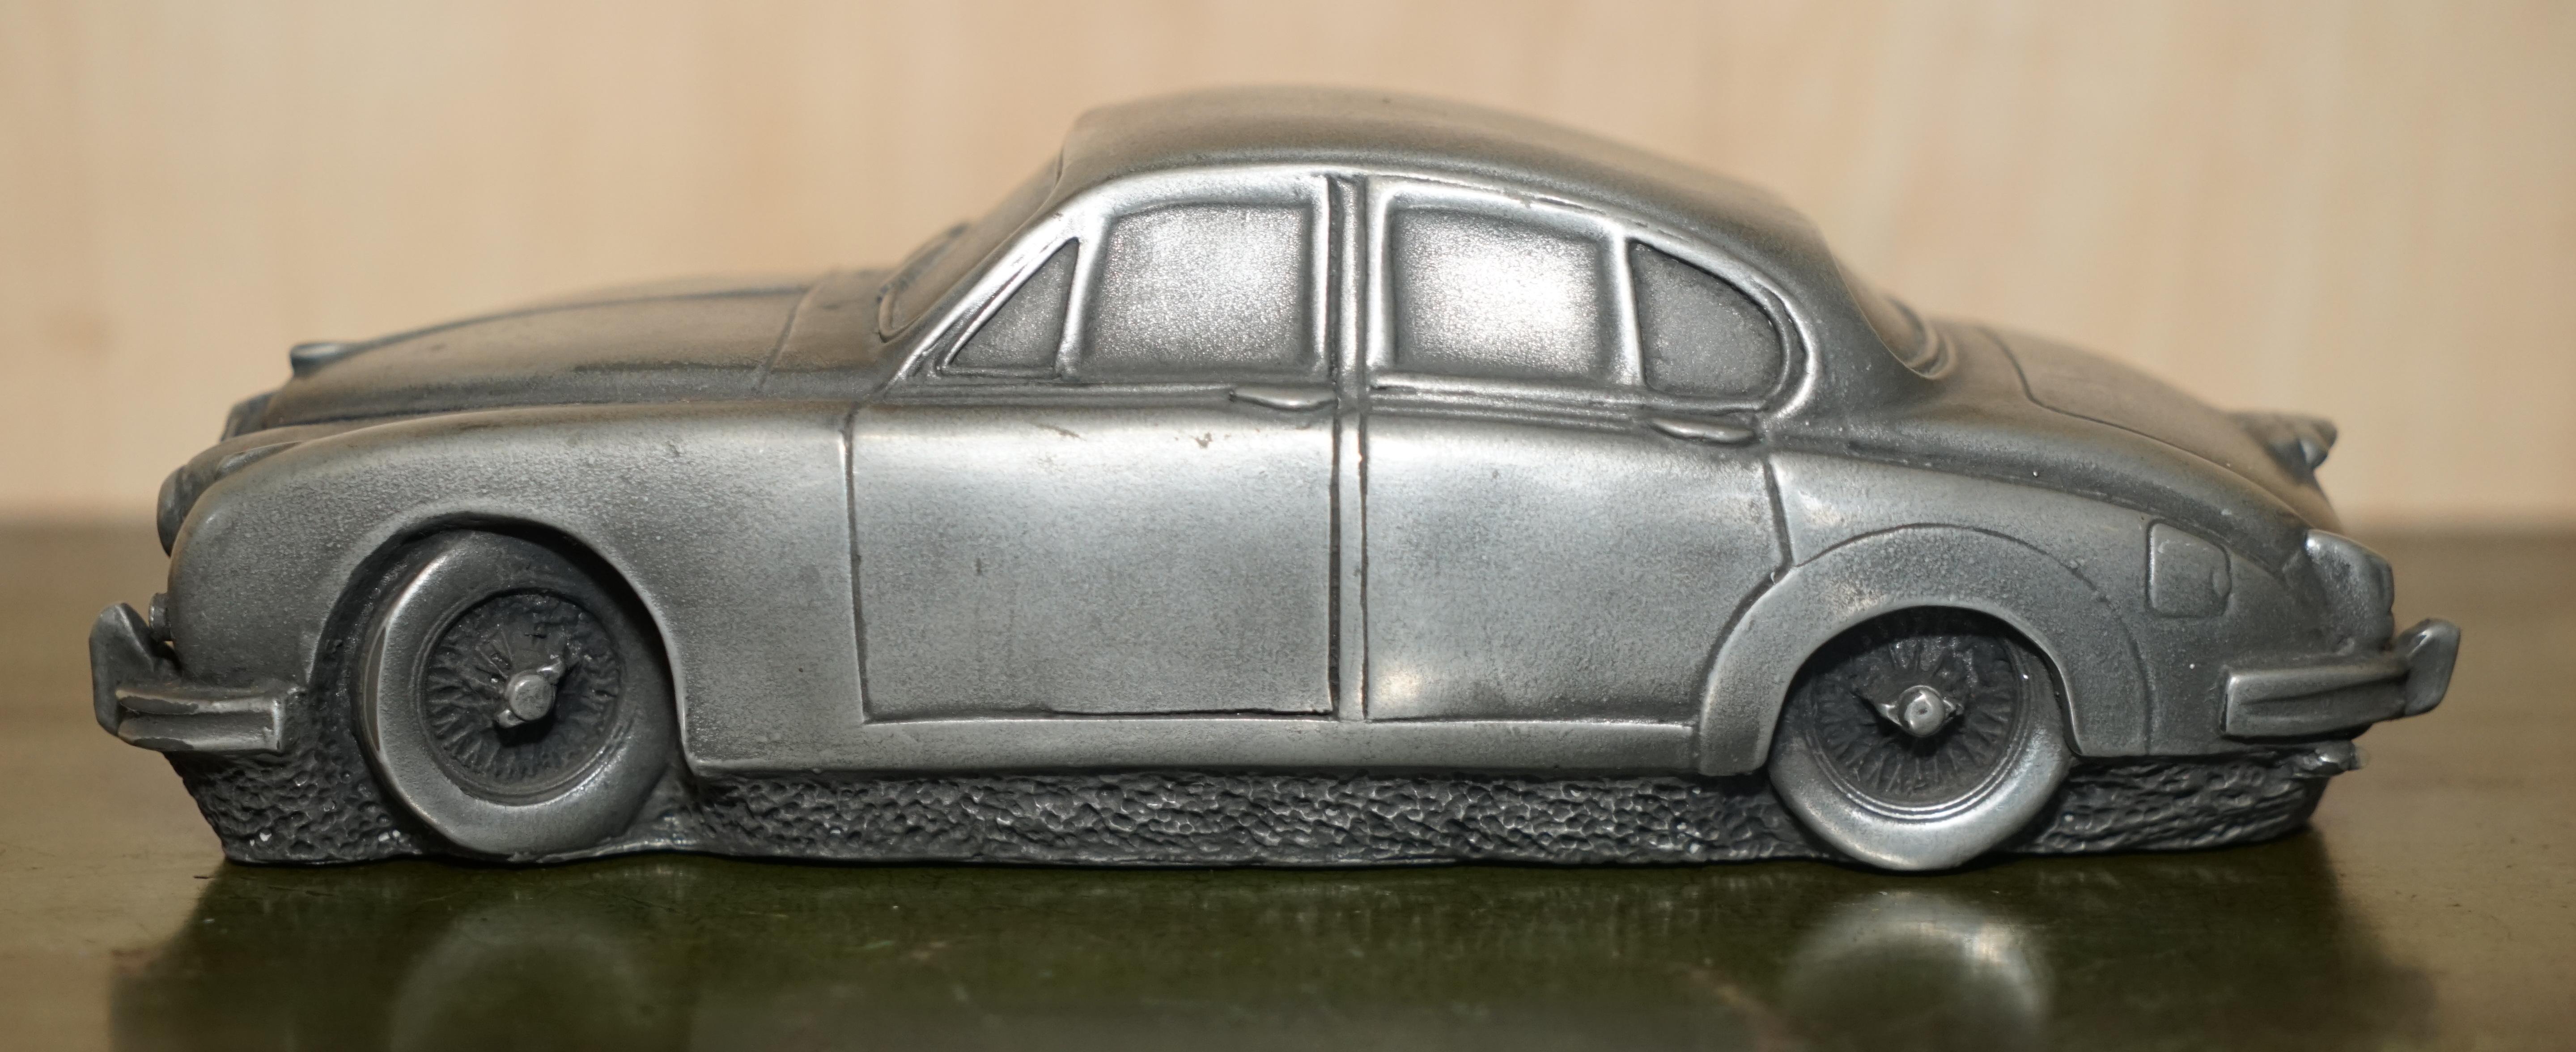 Hand-Crafted Compulsion Gallery Pewter Jaguar 1955-1959 Edition Mark i Car Must See Pictures For Sale